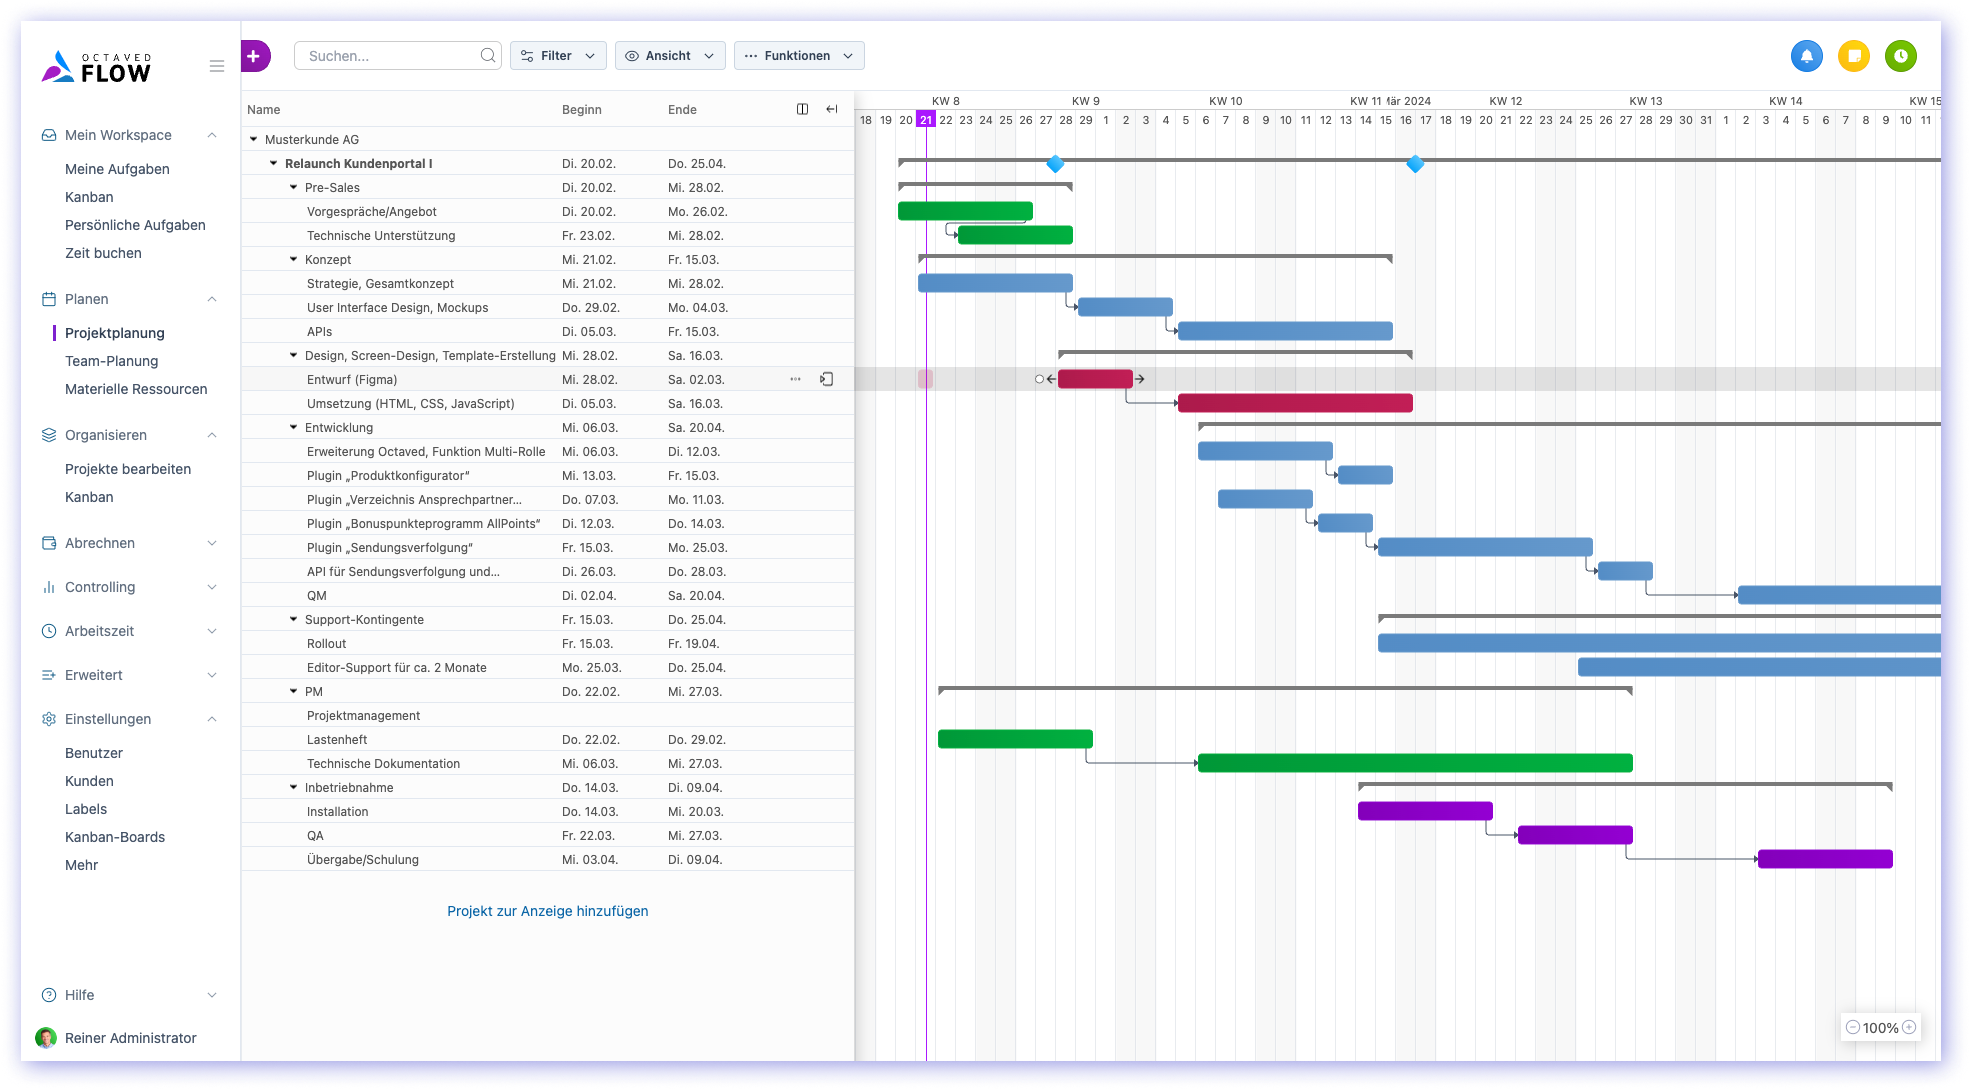 Compressed planning view